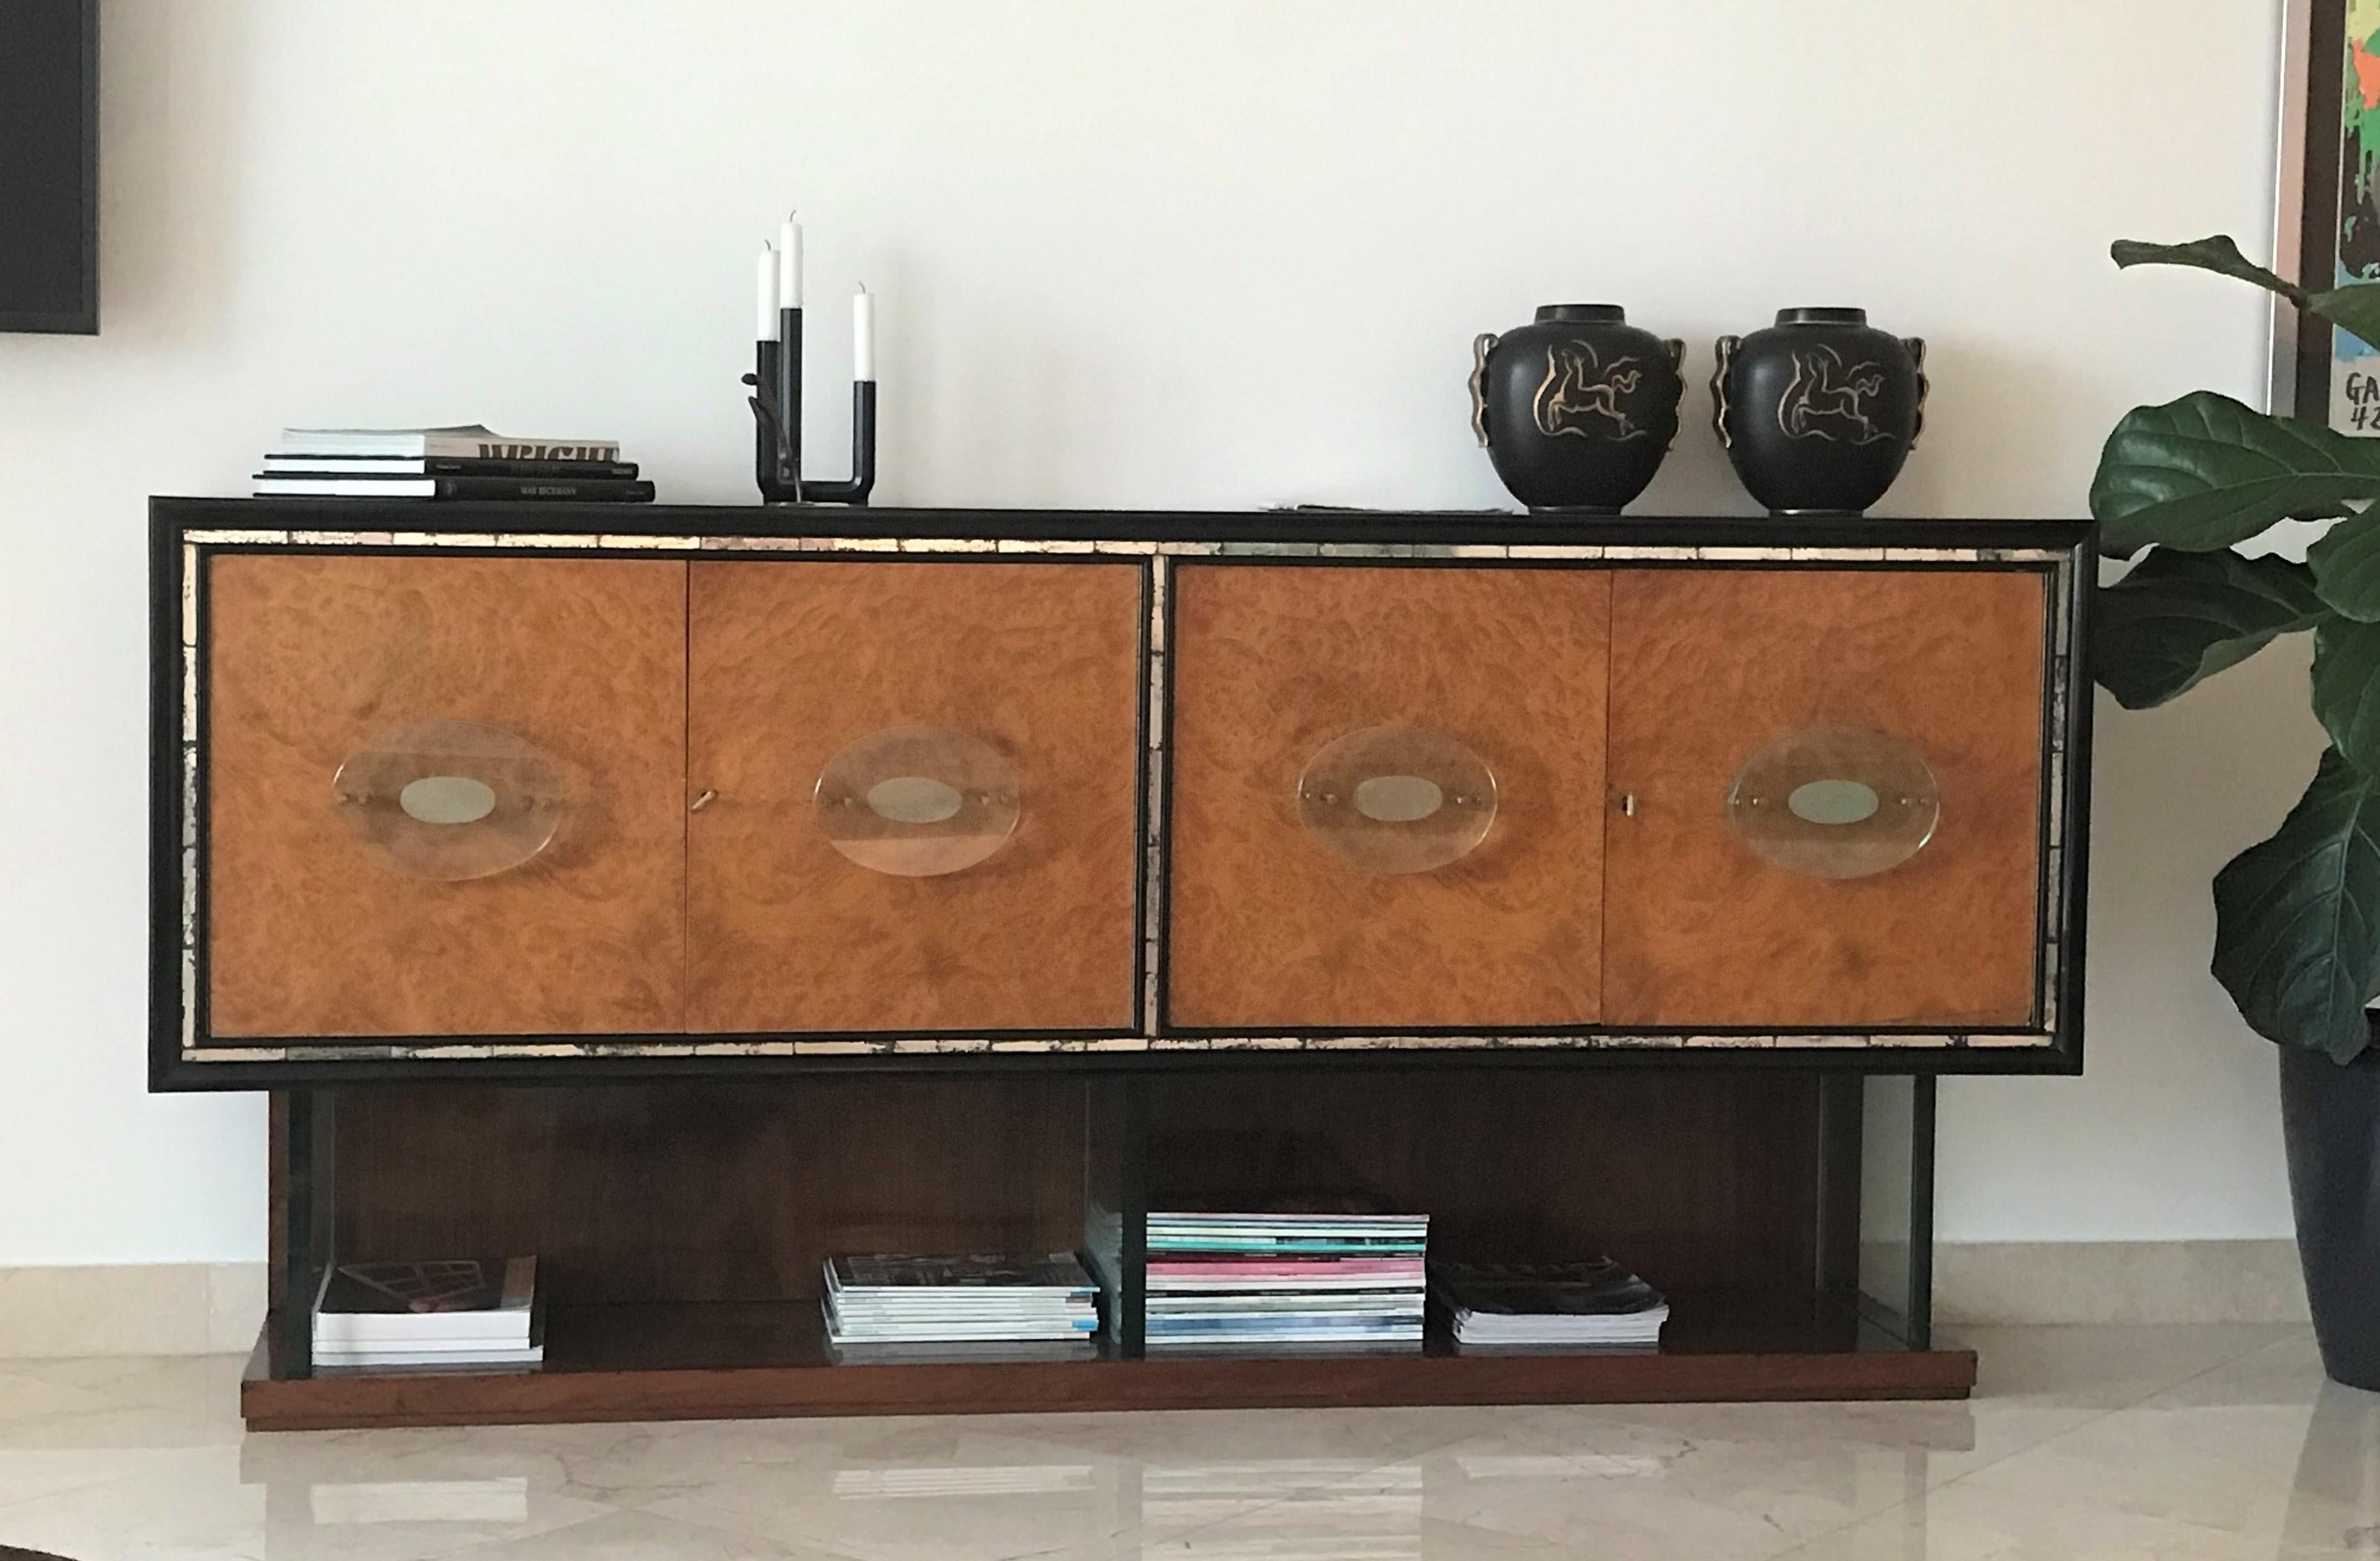 REDUCED FROM $22,000....Superb and stunning Italian Art Deco Modern rosewood and Carpathian burl credenza cabinet with thick Fontana Arte glass handles and bottom supports. The body in Rosewood (Palisander) and ebonized wood with surrounding inset